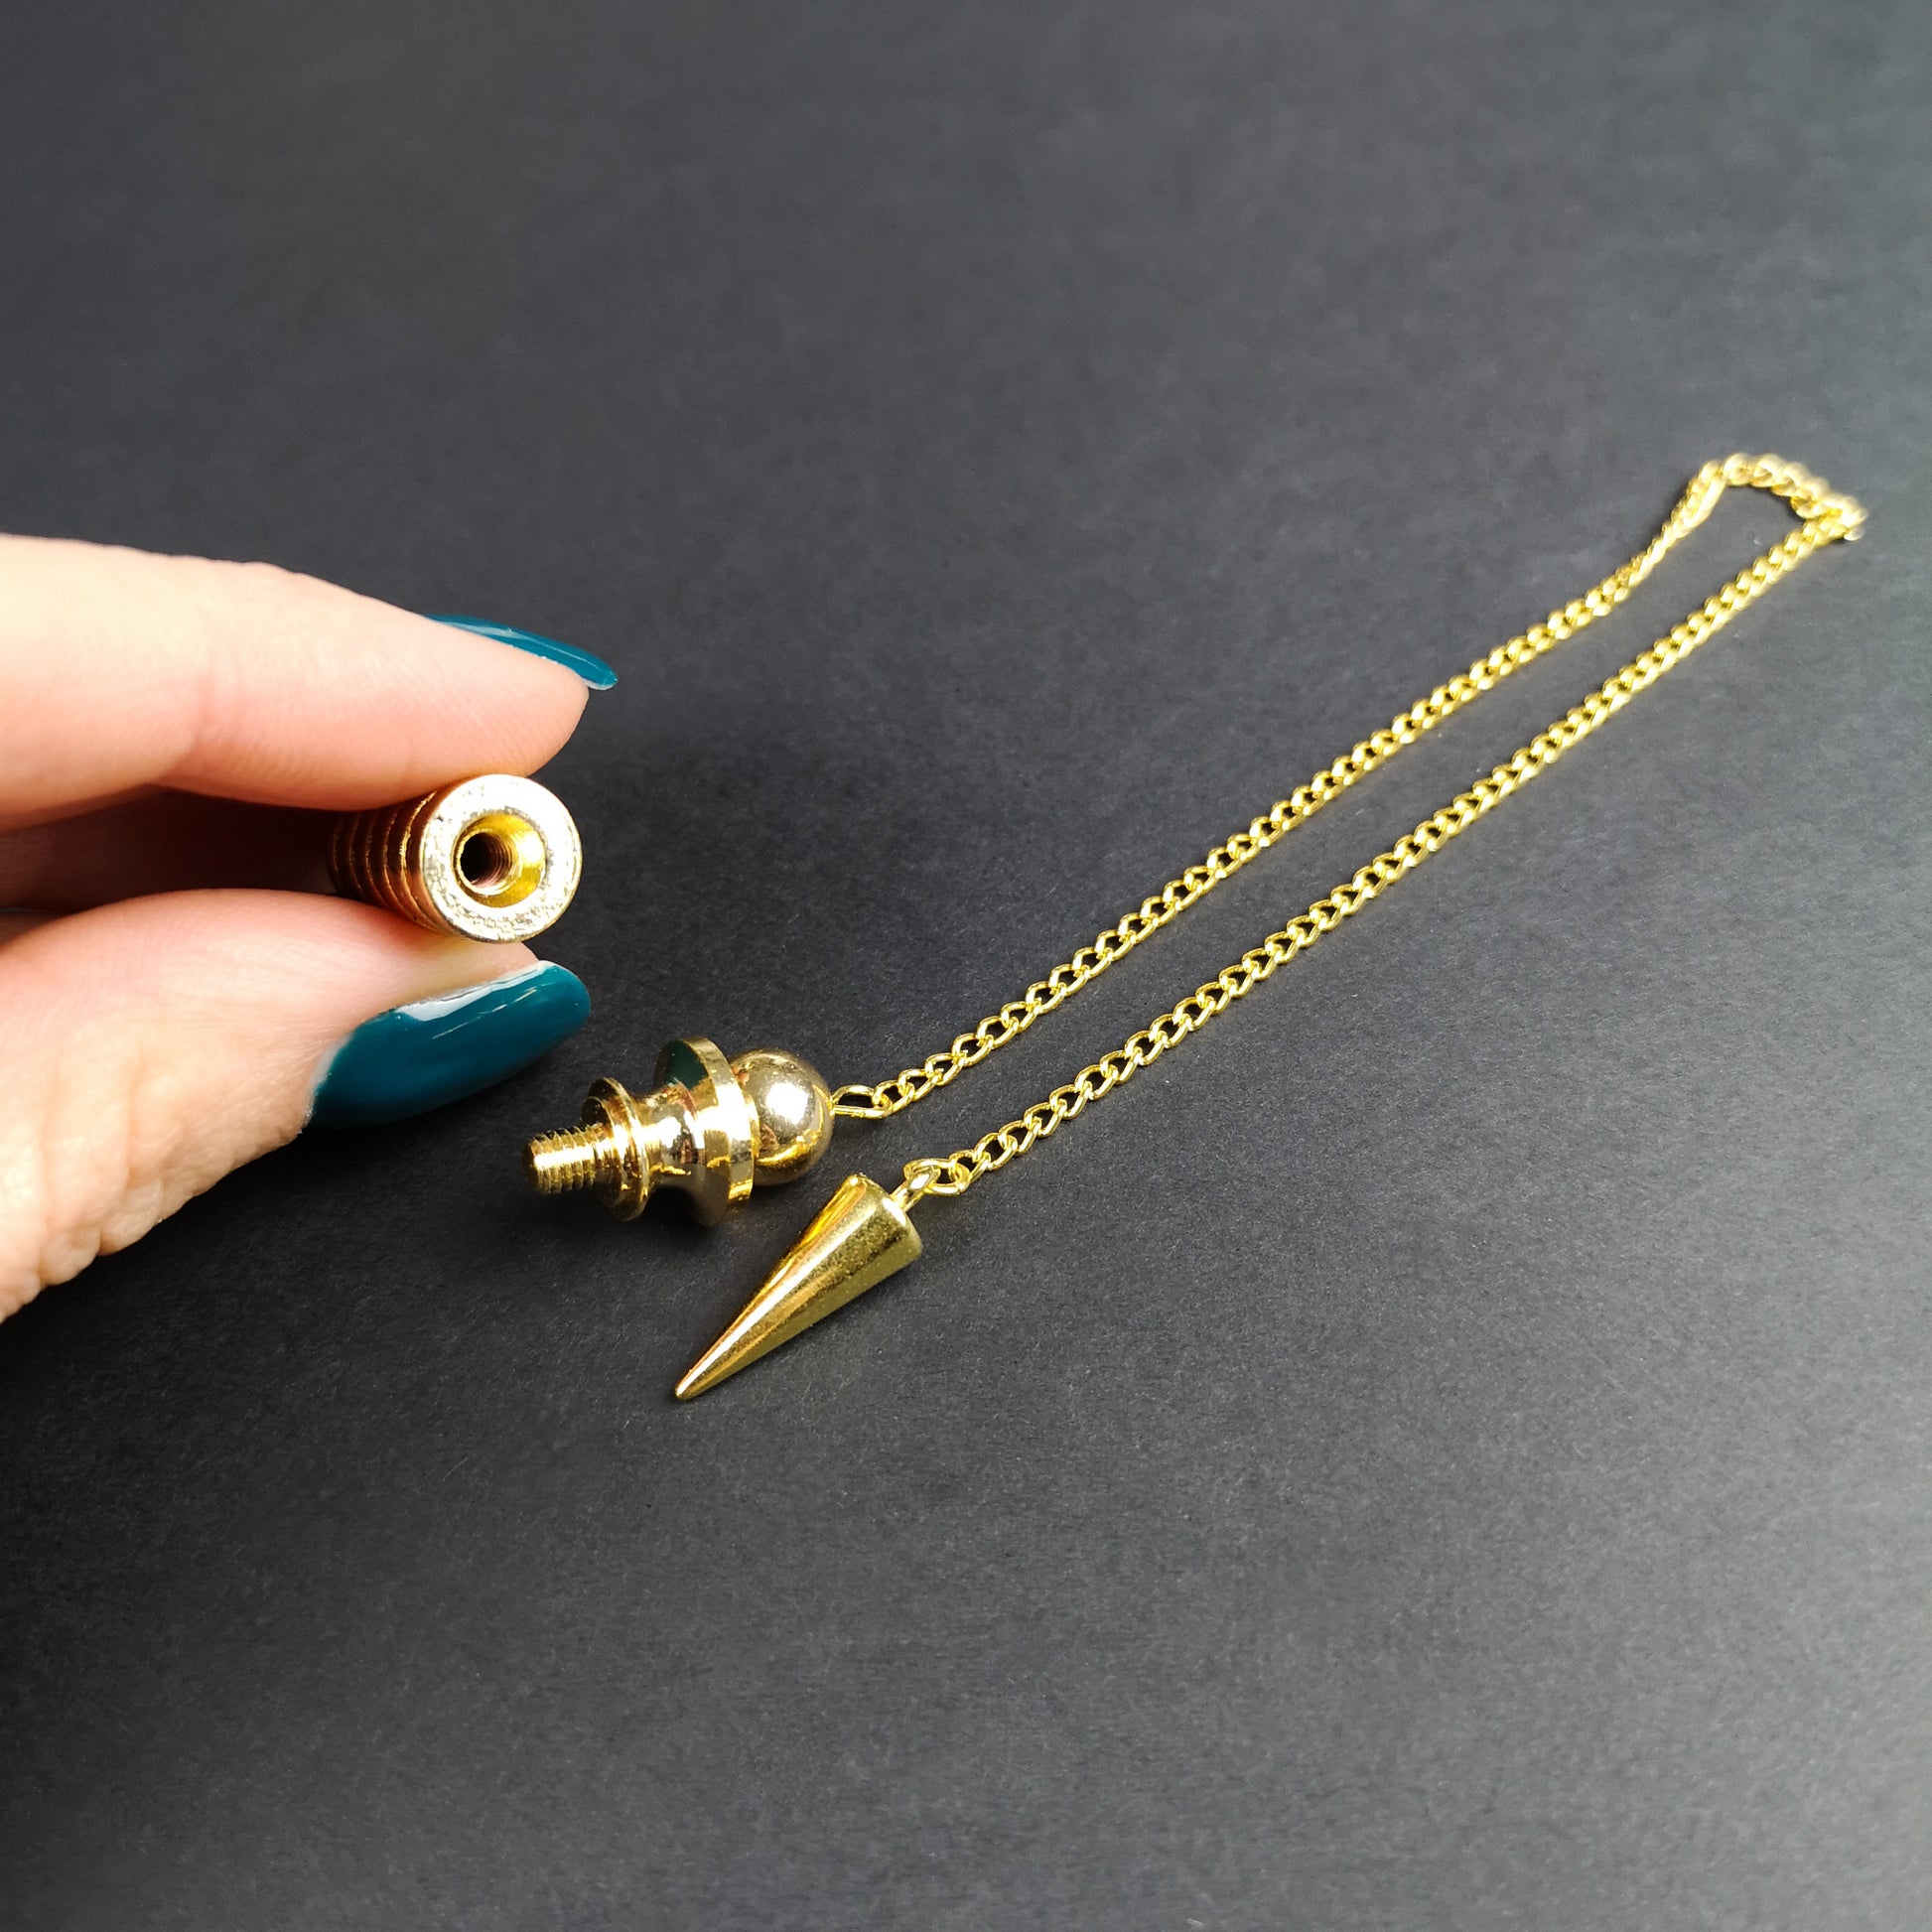 Golden Egyptian Isis dowsing pendulum with a chamber - The French Witch shop